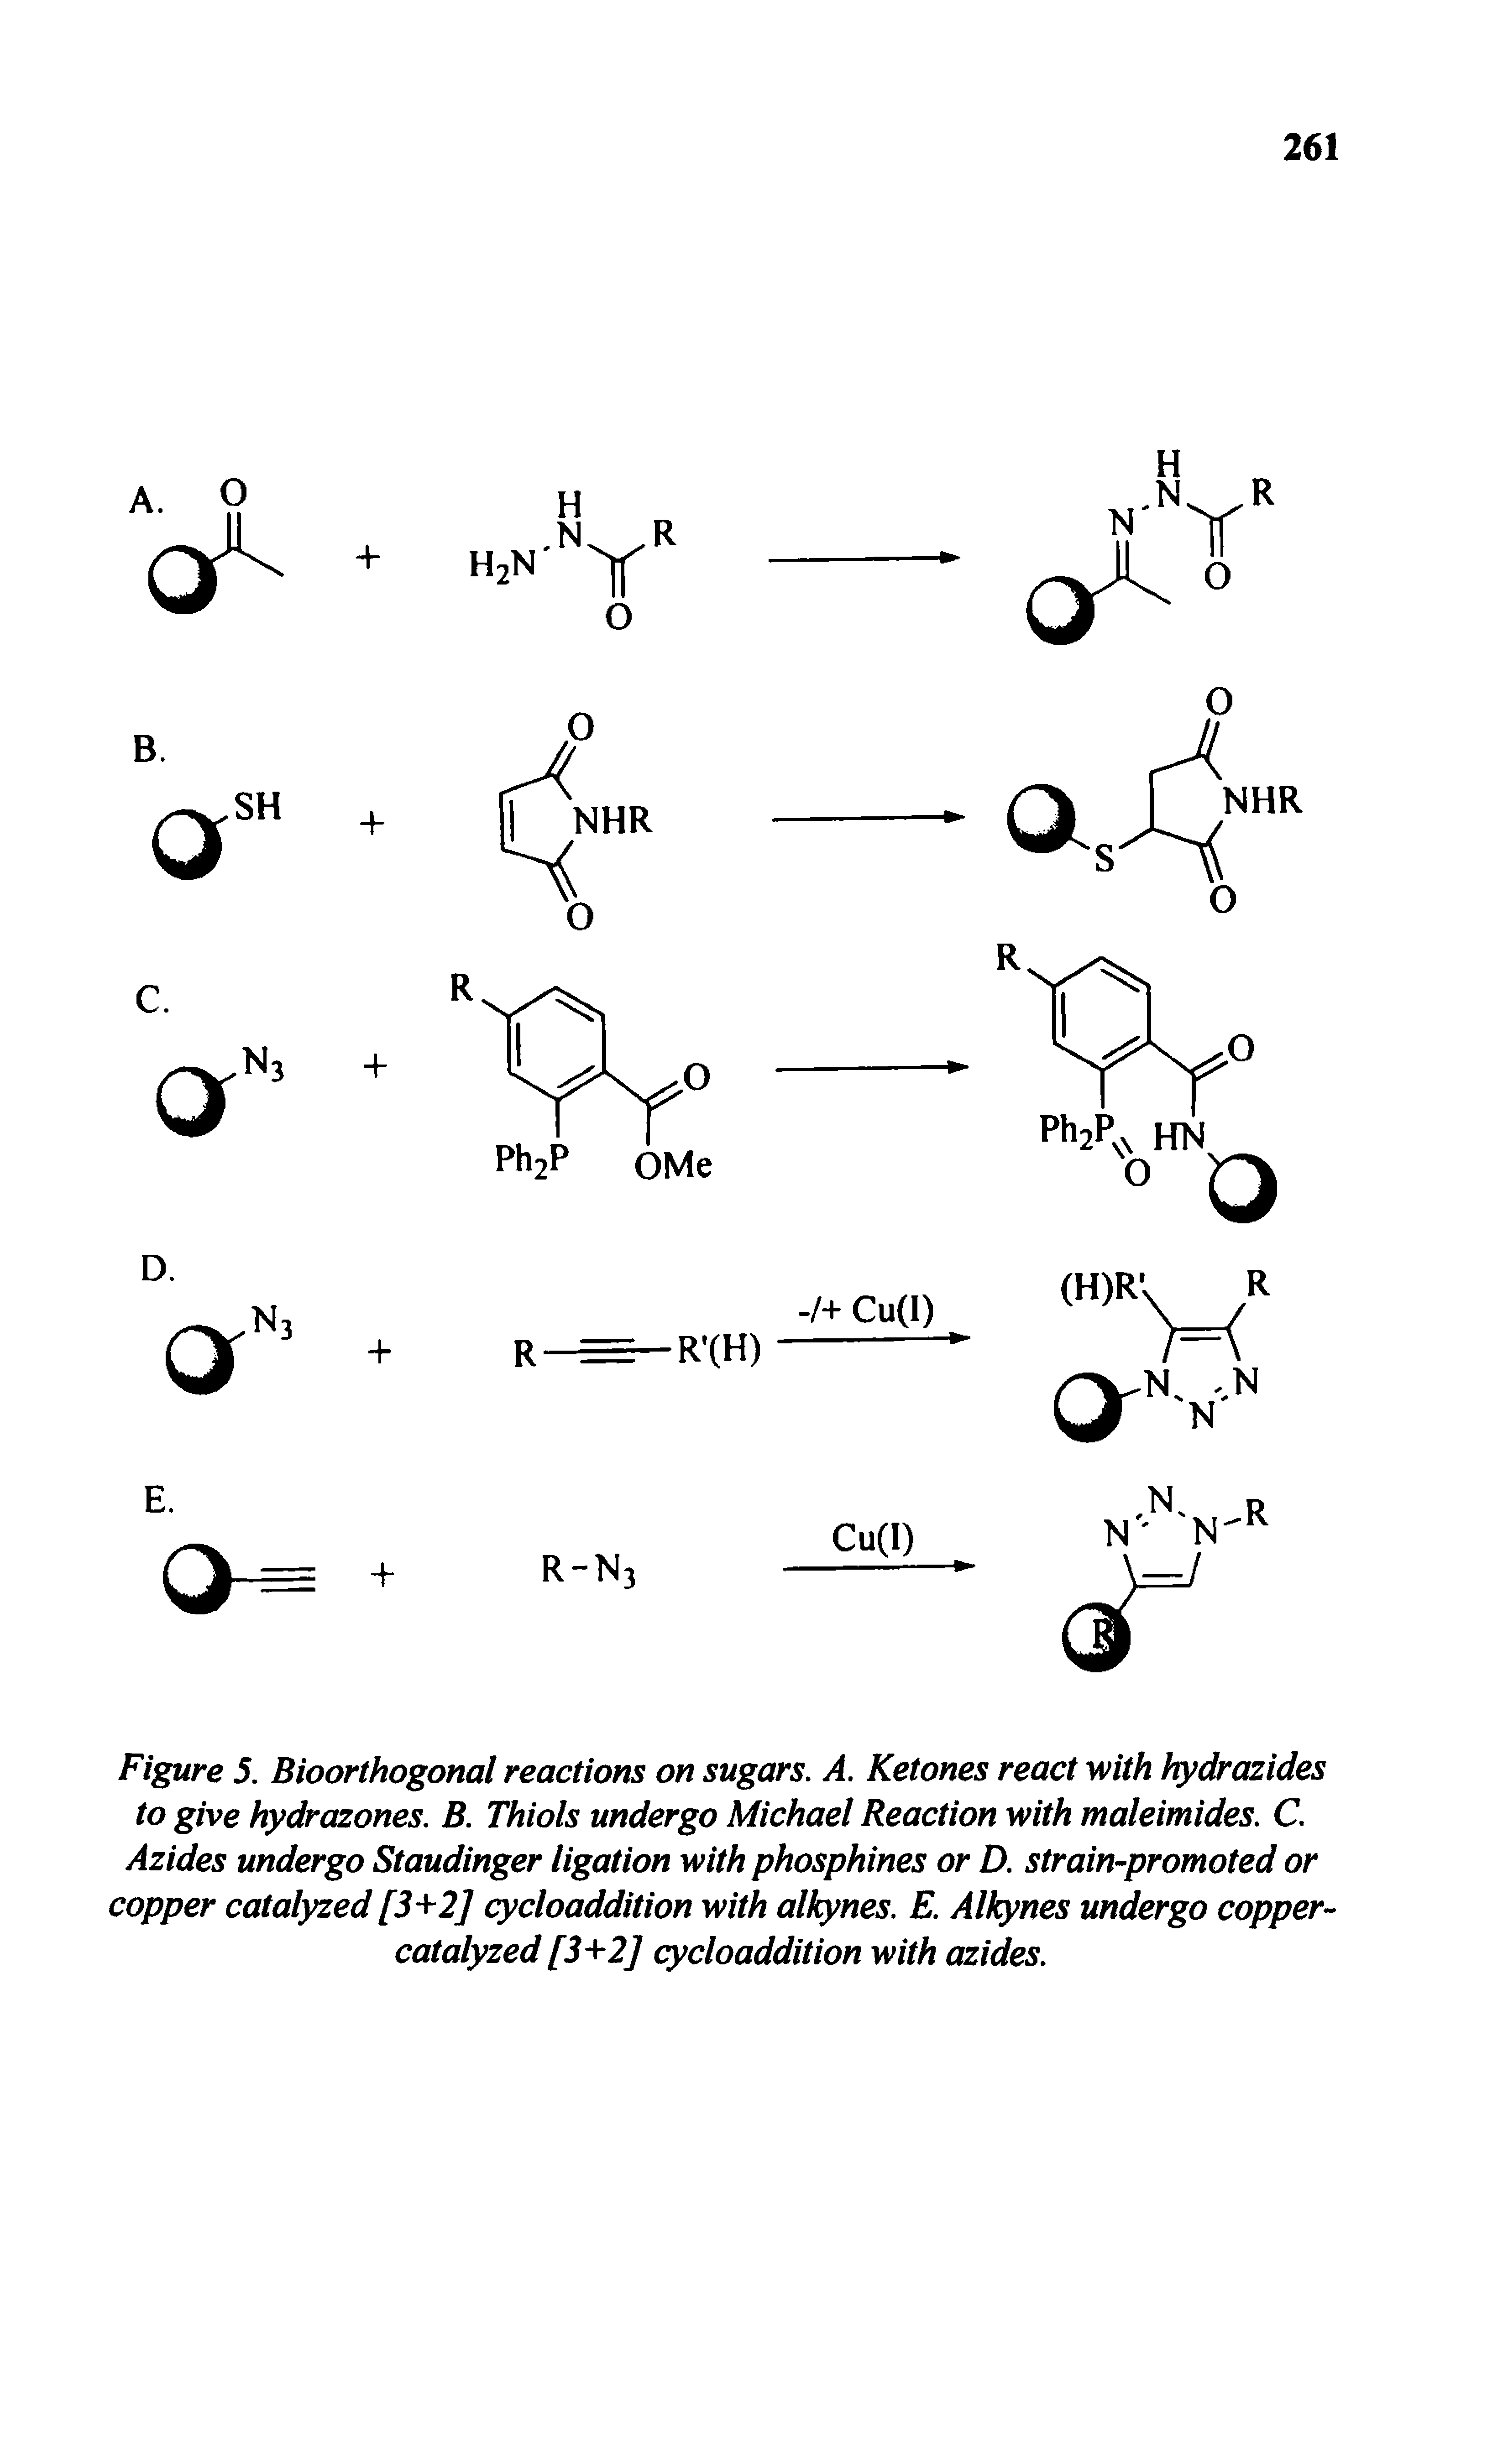 Figure 5. Bioorthogonal reactions on sugars, A. Ketones react with hydrazides to give hydrazones. B. Thiols undergo Michael Reaction with maleimides. C, Azides undergo Staudinger ligation with phosphines or D. strain-promoted or copper catalyzed [3 2] cycloaddition with all nes. E. Alkynes undergo copper-catalyzed [3- 2] cycloaddition with azides.